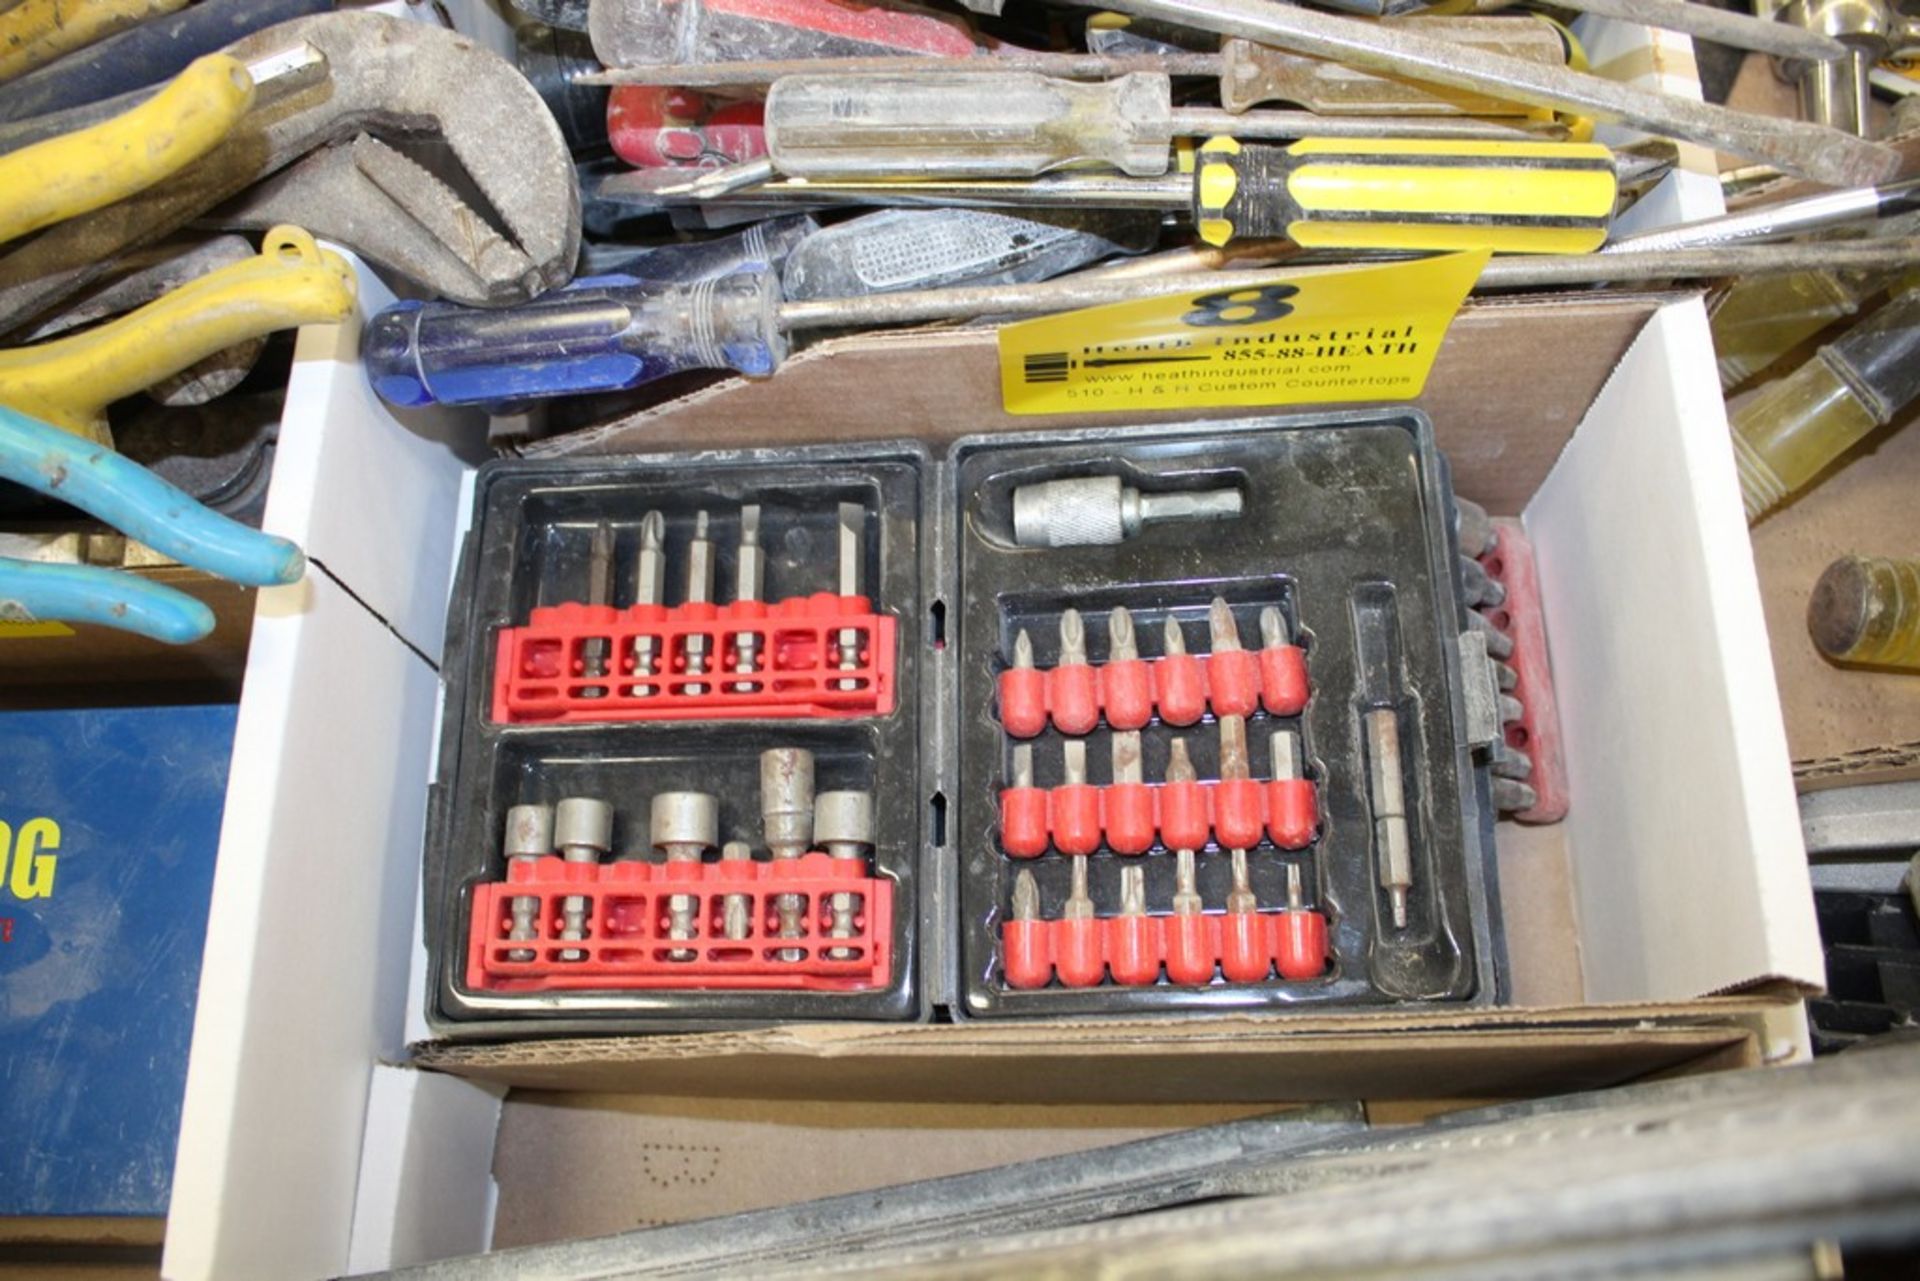 ASSORTED DRIVER BIT SETS IN BOX - Image 2 of 2